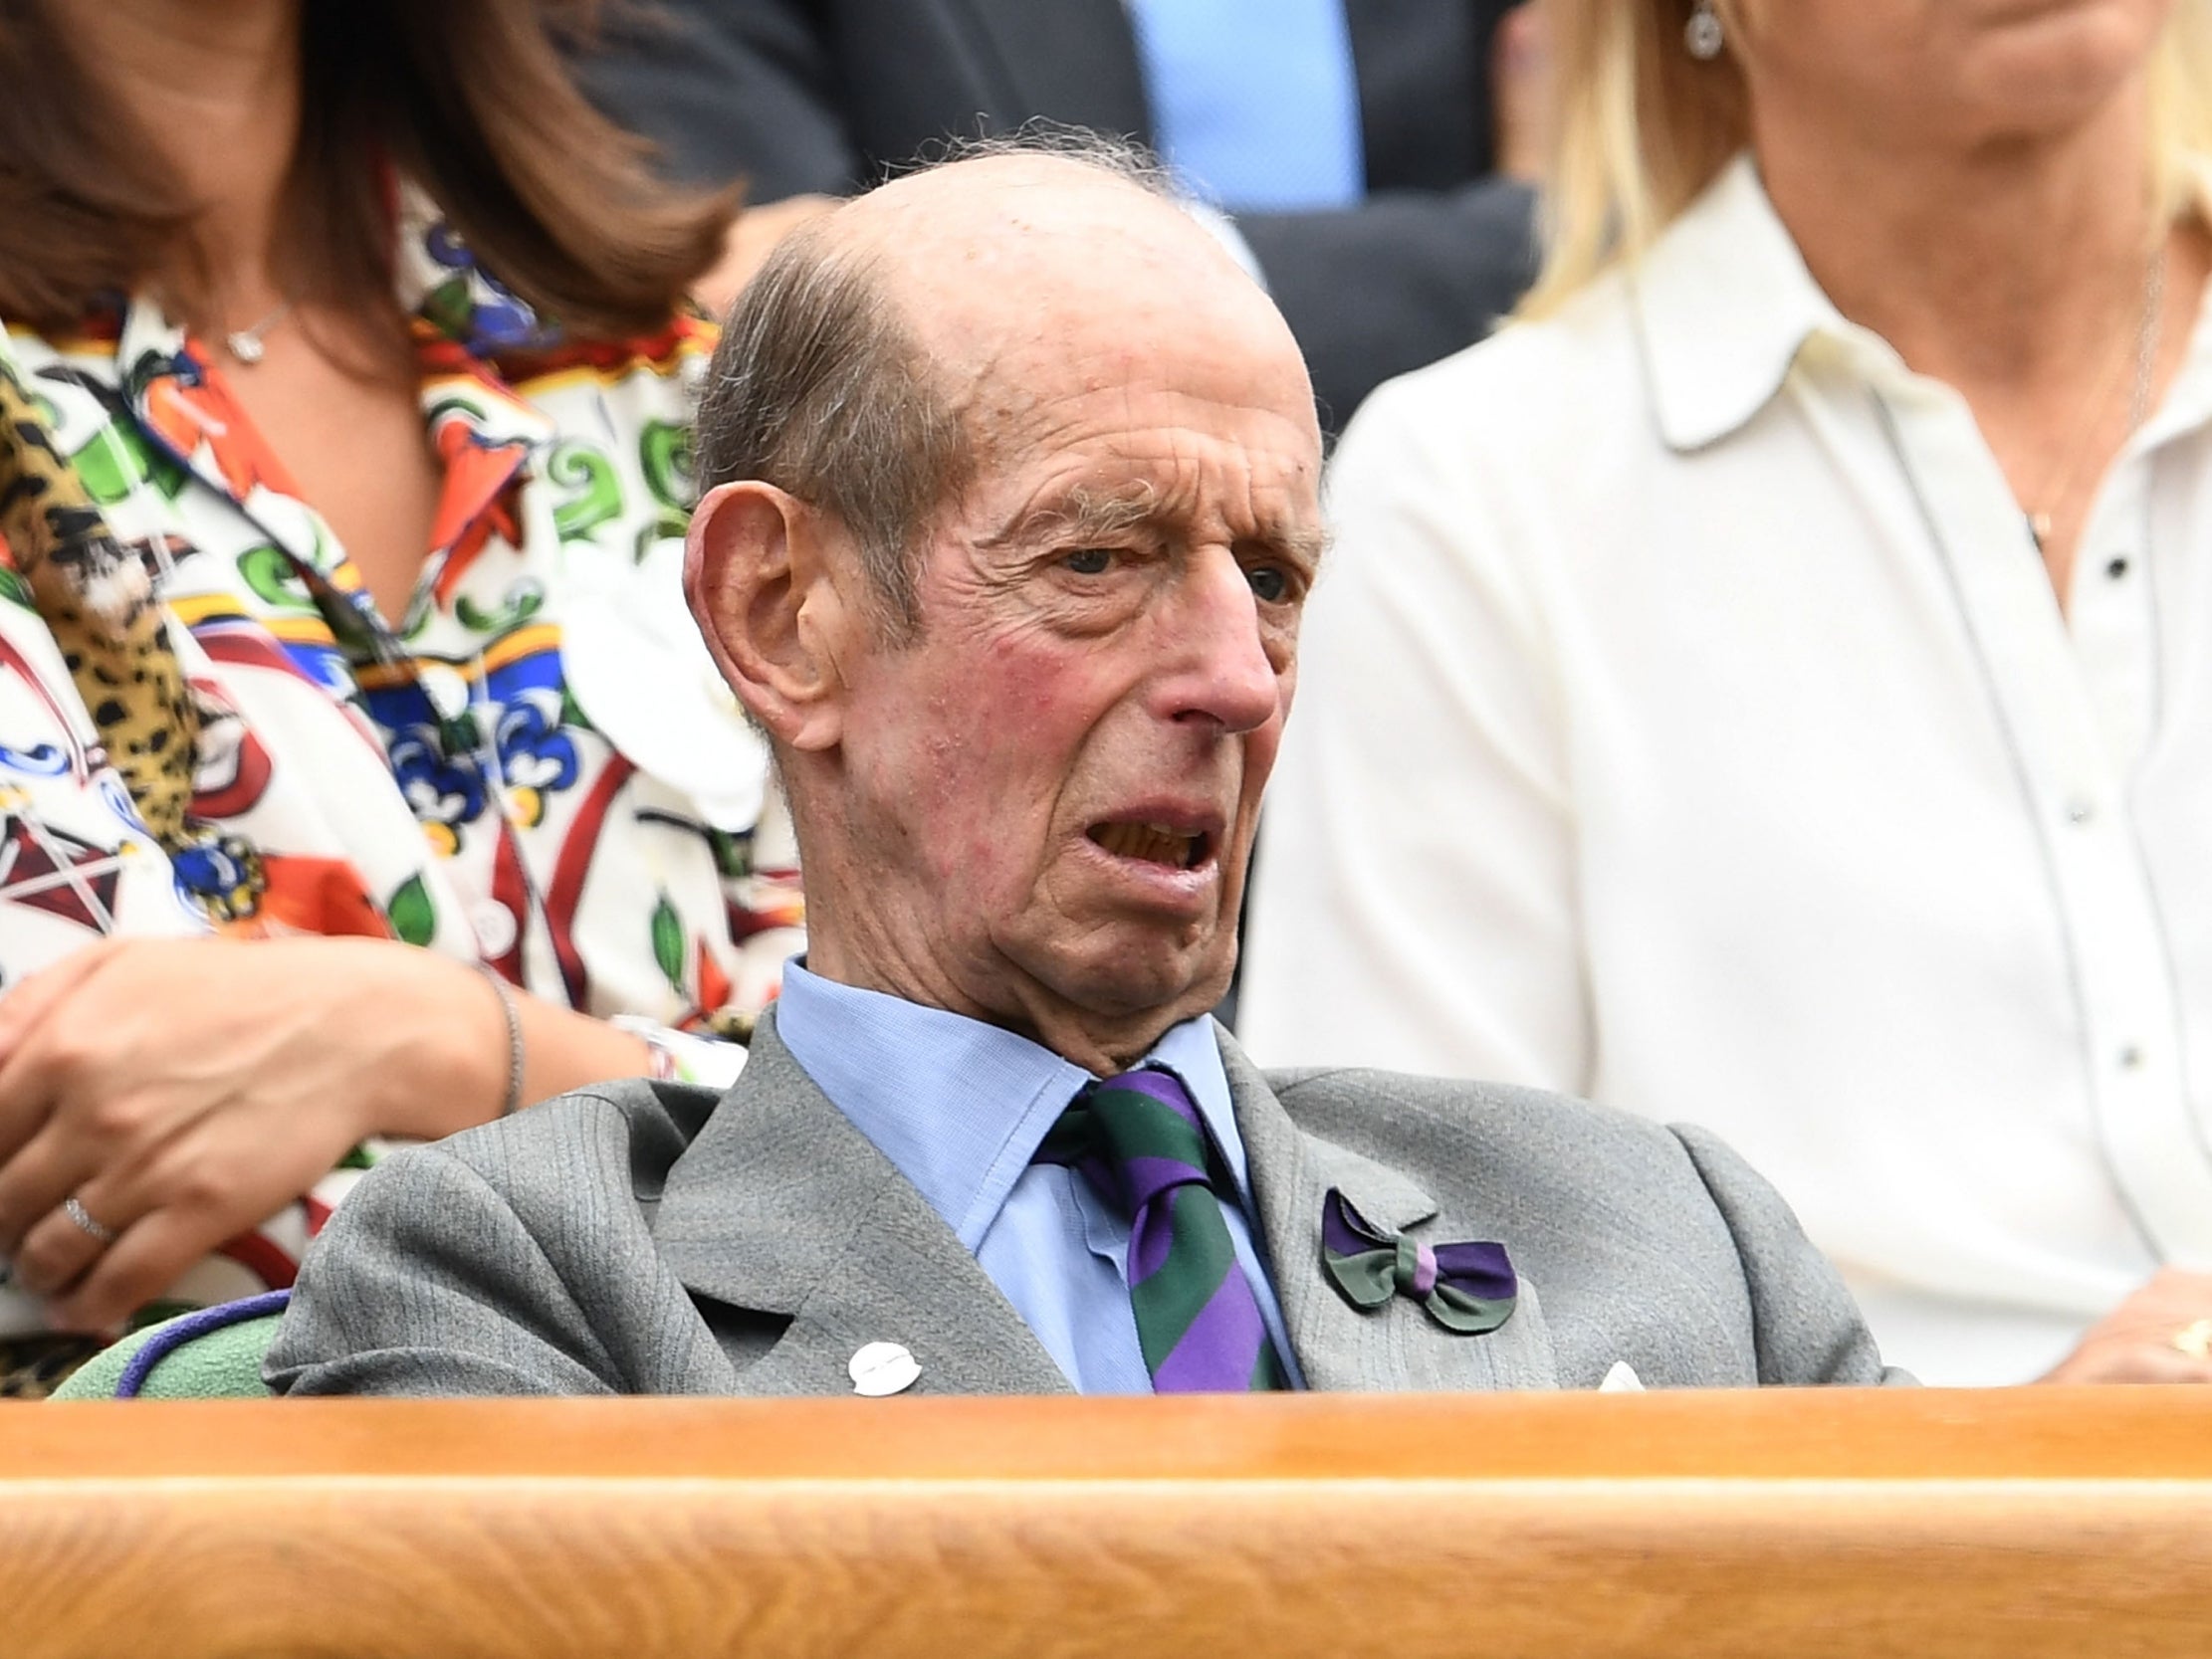 Duke of Kent could face police investigation after crashing car in Brighton